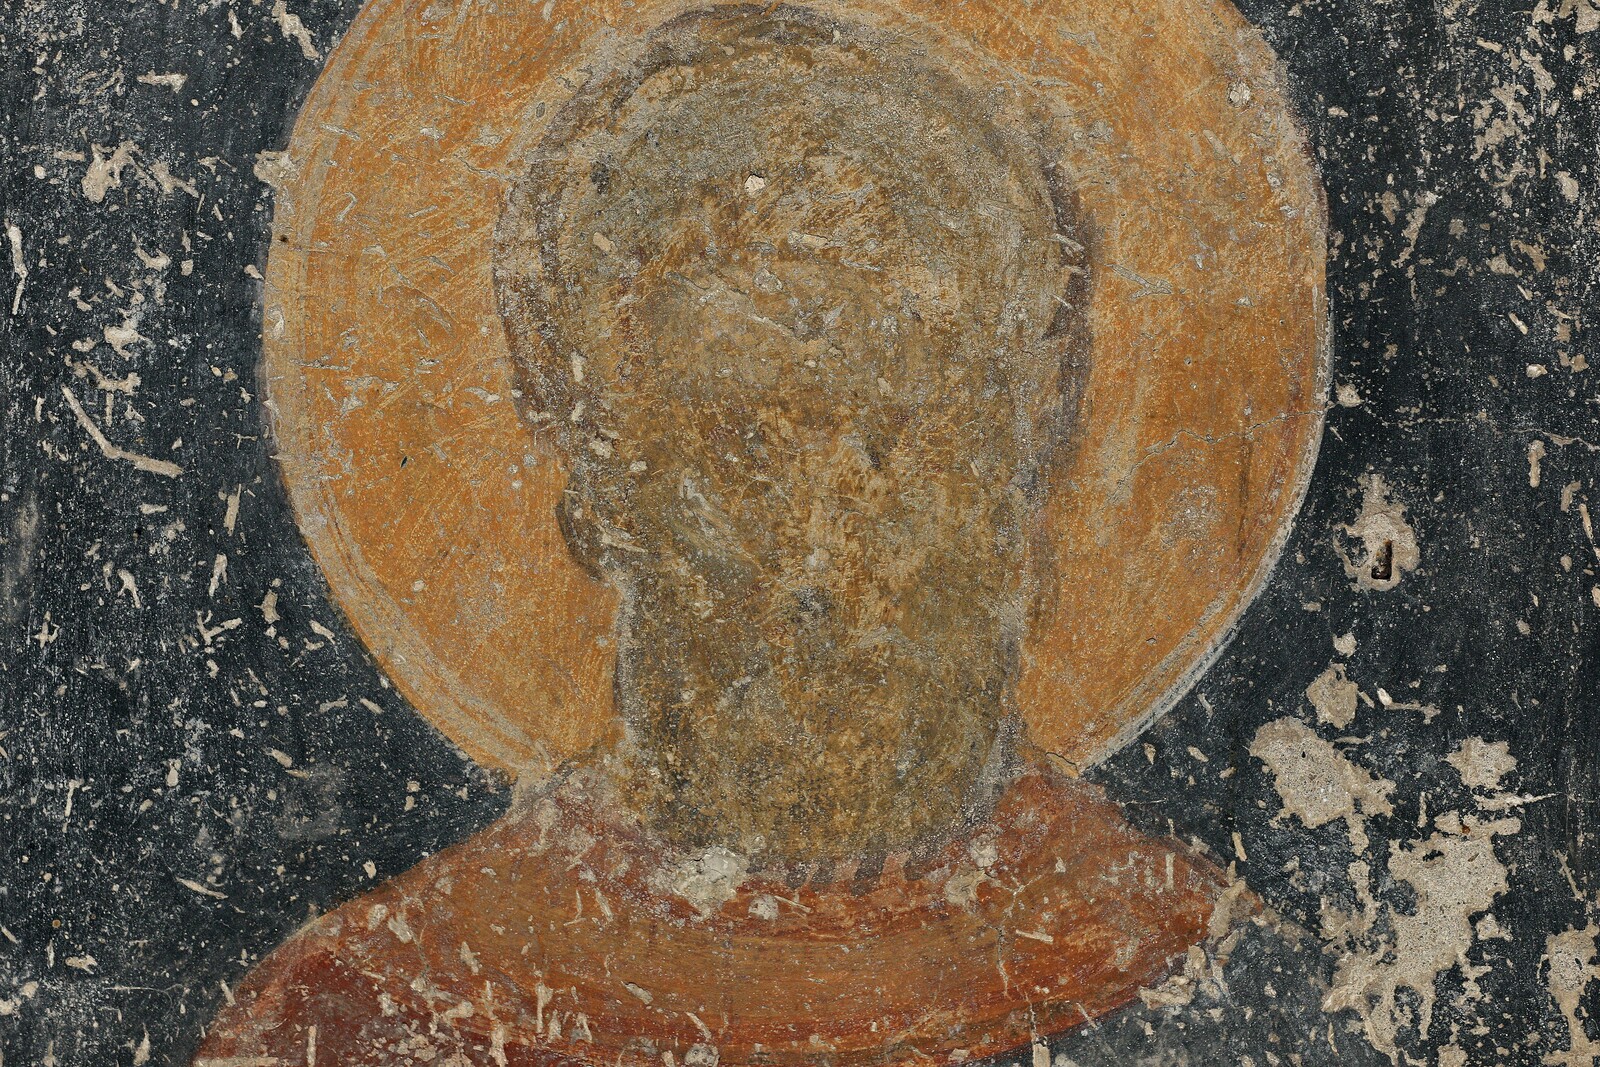 Unrecognized Holy Martyr, detail